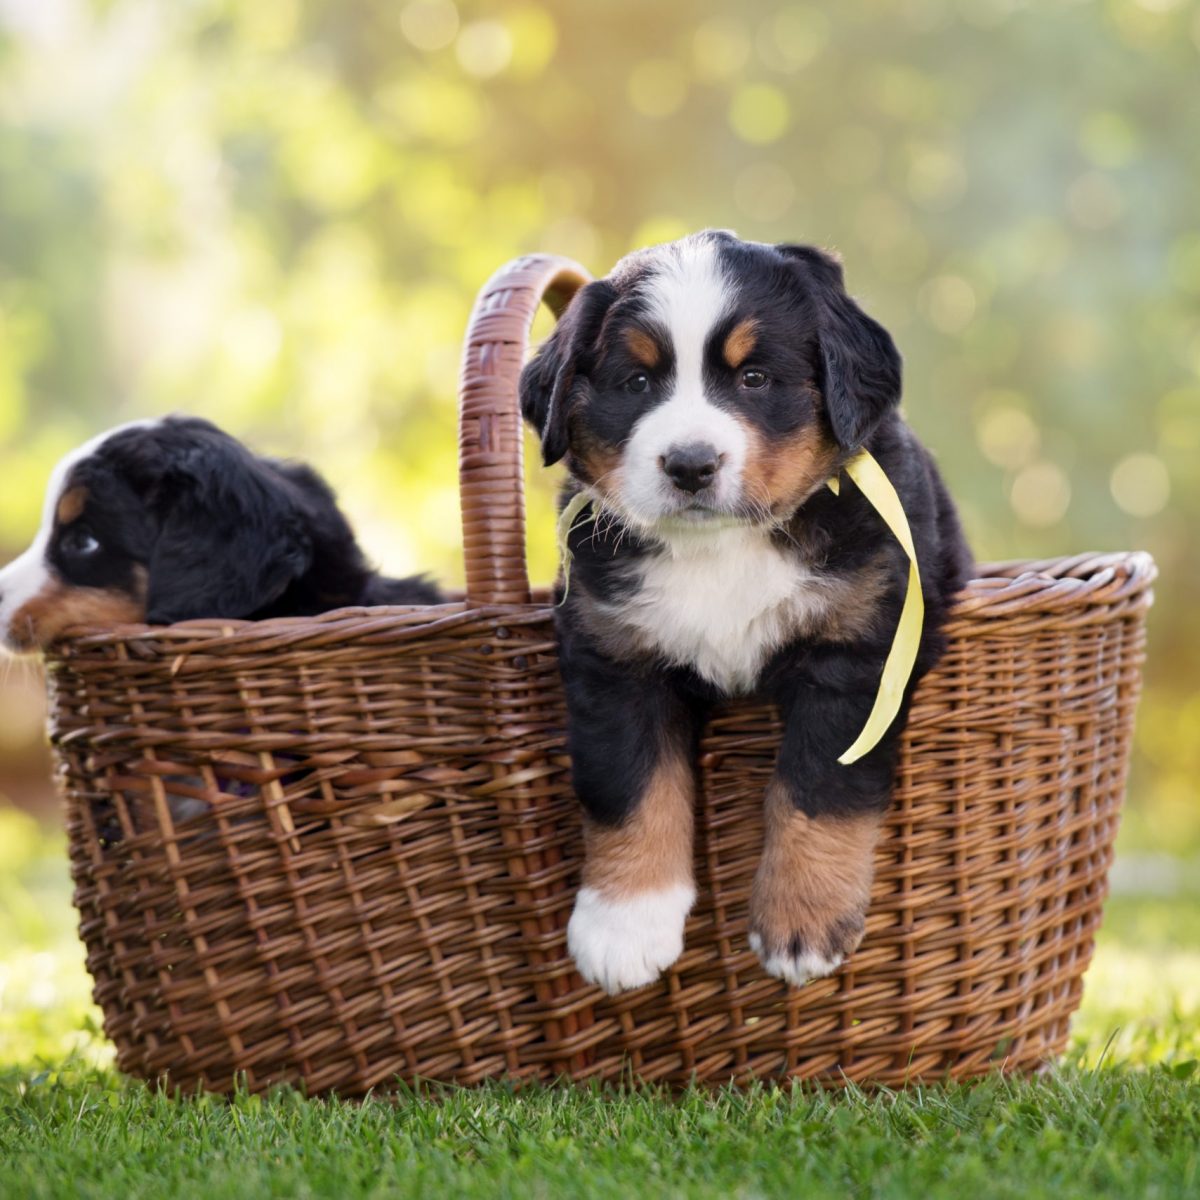 Bernese,Mountain,Puppy,In,A,Basket,Outdoors